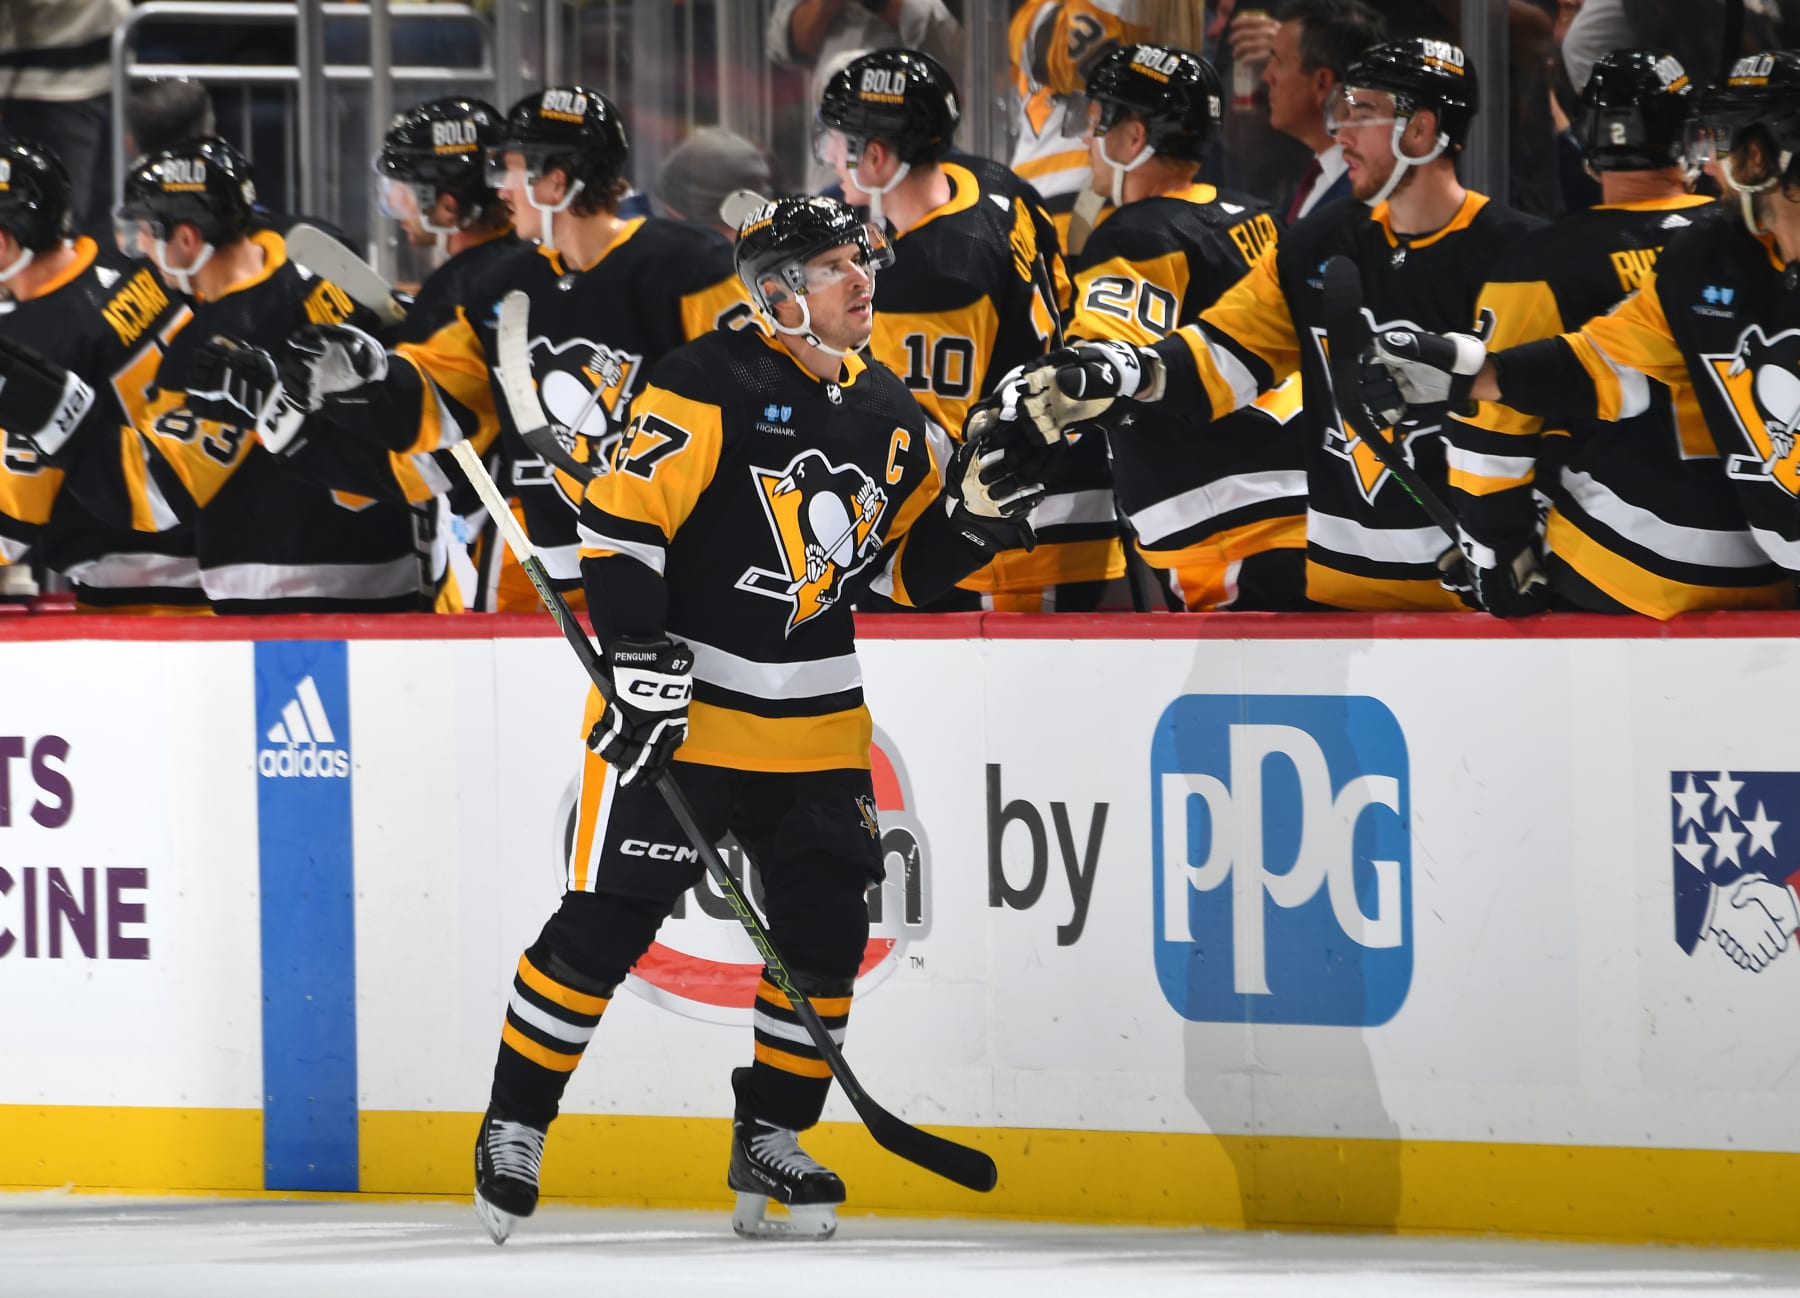 With a fresh start, Jared McCann looks to give the Penguins the third line  they lacked